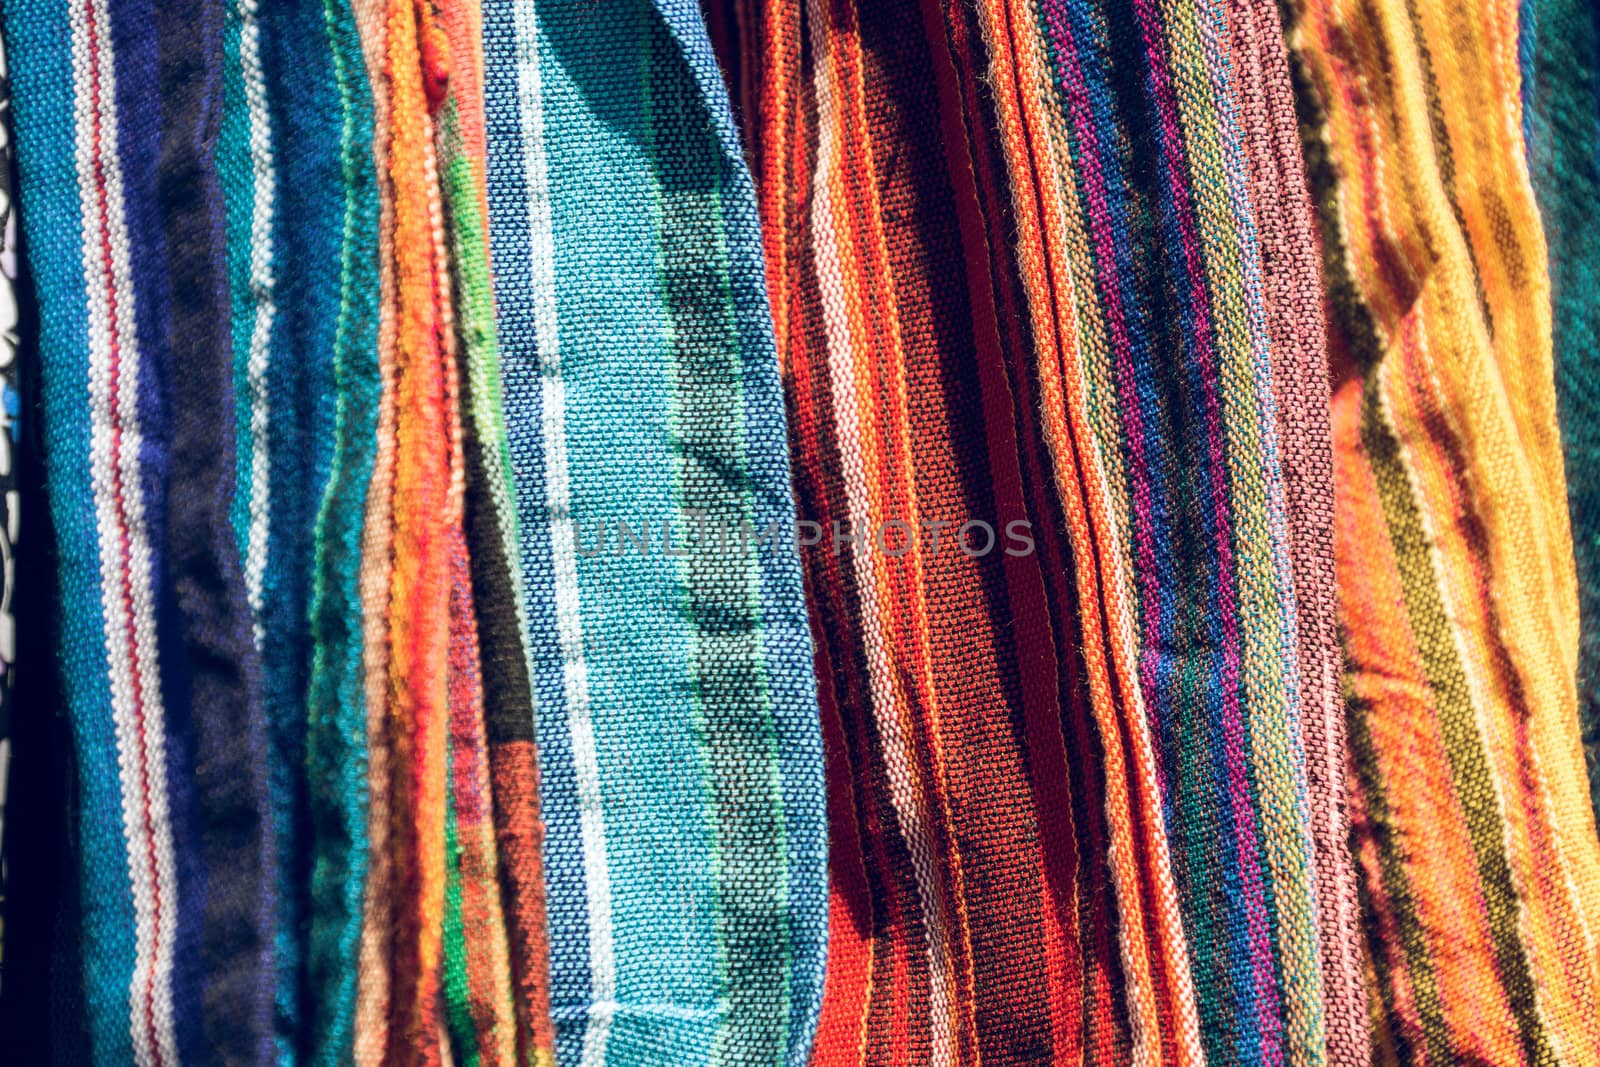 Abstract detail of a pile of colourful fabrics at a flea market, Germany